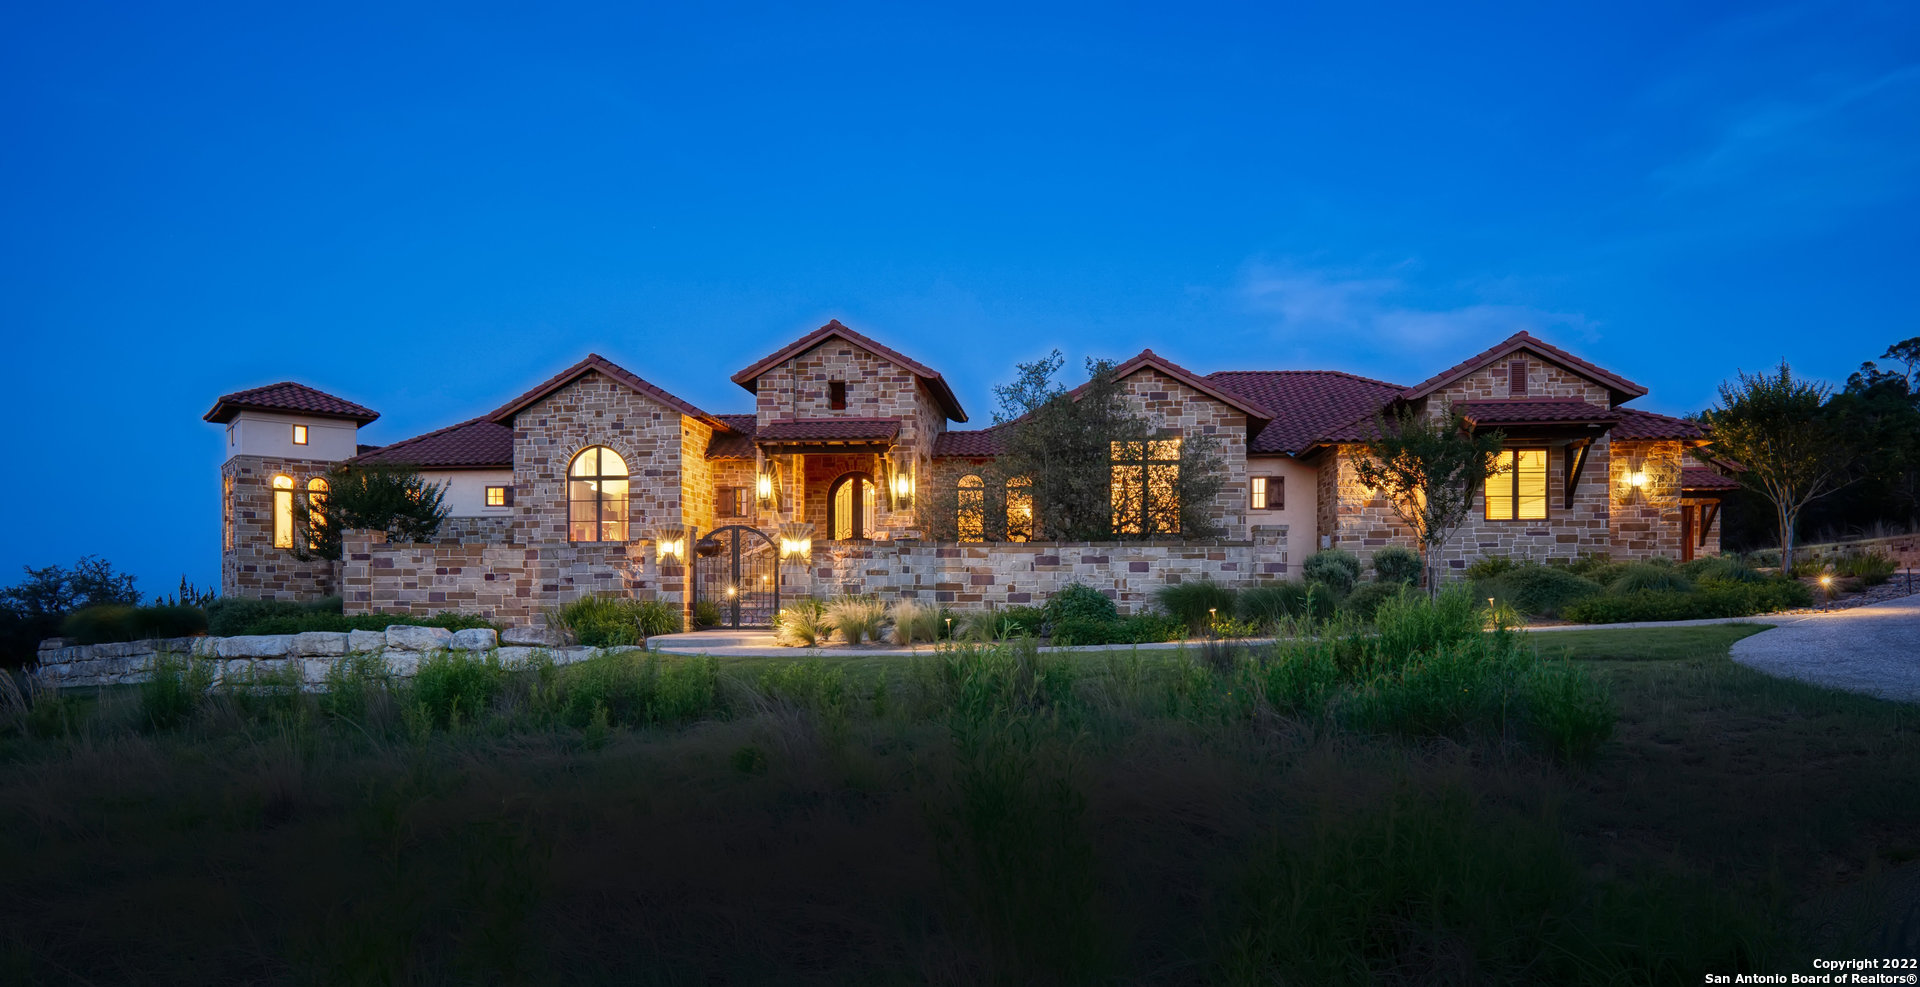 What an opportunity awaits you with this exquisite, stunning custom home with Hill Country sweeping and long range views AND privacy on the very rare 2.07 acres within "The Clubs Area" of Prestigious Cordillera Ranch just a short golf cart ride to the course and club.  Arriving at your majestic front entrance  and though to the foyer your eyes  are drawn out to the views and then in two directions of the gallery accented by custom sconces and chandliers to see stone accented Art niches leading you to thoughtfully well planned out areas of living spaces with an incredible amount of detailed careful planning and execution. The formal generous dining room with an accent wall of warm stone is adjacent to the wine room and the butler's pantry. The kitchen, the nook and the captivating living room all look out to the views and spectacular outside living areas. The entertainer enthusiast has their dreams come true with this gourmet kitchen with a huge island, breakfast bar, an abundance of custom cabinetry and storage. Wolfe appliances and the gleaming copper vent hood surrounds many work spaces and a walk in pantry. The kitchen opens to a very generous dining nook area and as well, opens to the impressive great room featuring the stoned floor to ceiling fireplace. The perfect place to relax and entertain and embrace family time is the amazing outdoor living spaces. A wrap around patio with many sitting and  dining options looks out to the beach entry pool, waterfall and infinity edge spillway. A summer kitchen is located on the expansive covered patio with fireplace and another sitting  area. The well executed outdoor living spaces cohesively blend flagstone areas, planting areas and natural vegetation. All of this is surrounded by the unsurpassed scenic views of the Hill Country. This home boasts 4 bedroom suites, two offices perfect for remote learning and work, a media room, and another living room between two of the guest suites. An impecable oversized three car garage abundant with storage is close to the separate fourth car air conditioned oversize garage.  The master suite is the epitimy of what a master suite should be. Its own wing of the home with a private wrap around patio offering fabulous views. Refined elegance best describes the dramatic bedroom and bathroom with the freestanding tub framed by windows and views, the two onyx vanities, coffee/wine bar and a marvelous built in closet.  This home is very special and exudes warmth and great taste. call for your private viewing.